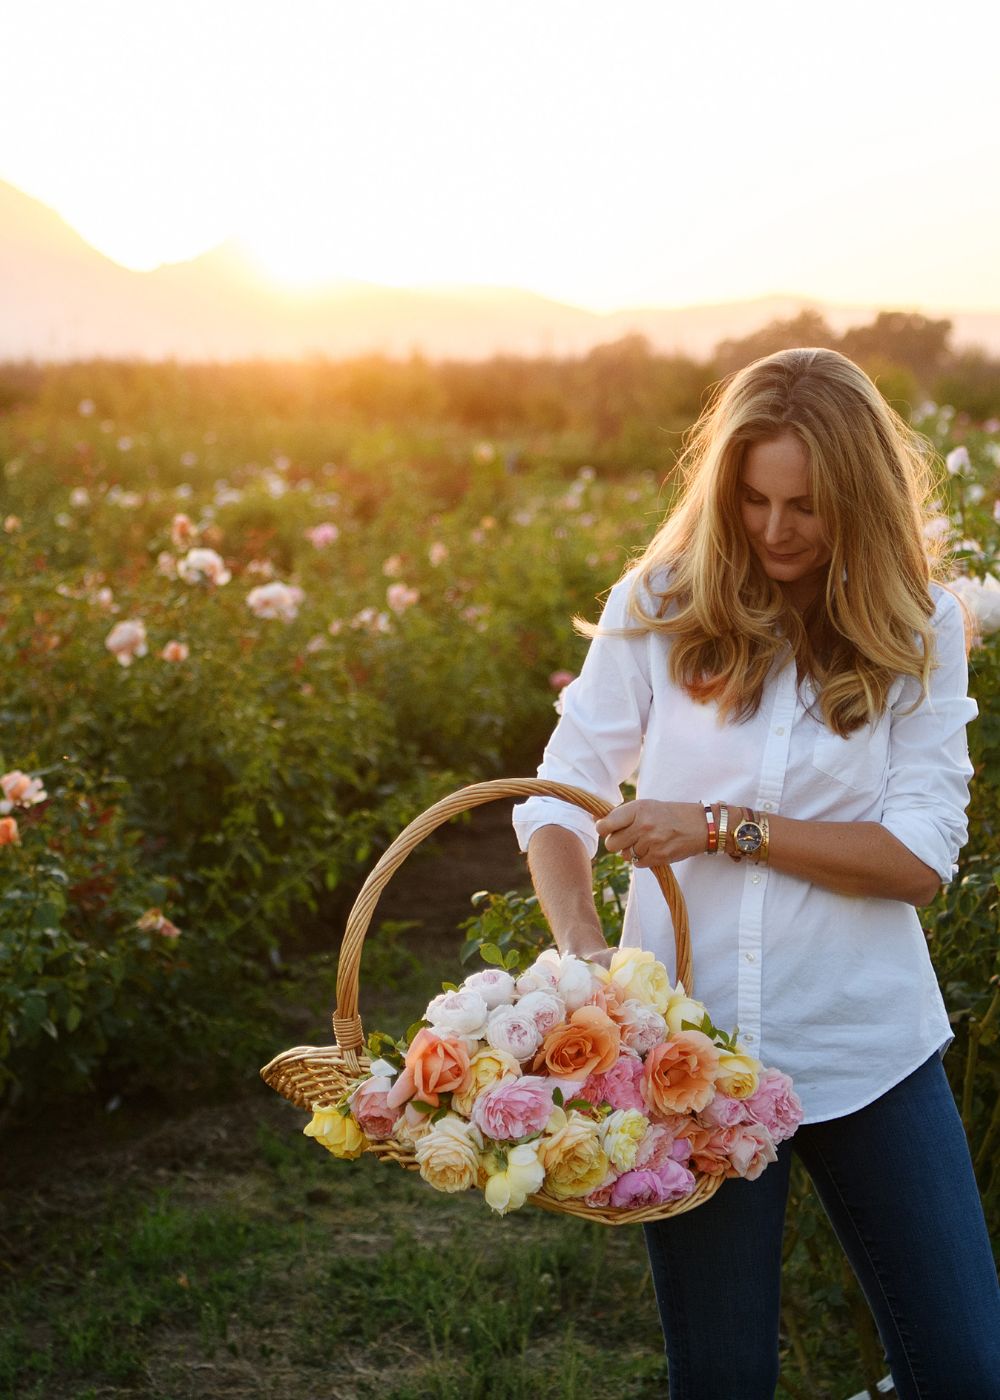 How To Harvest Cut Flowers: Harvesting Flowers From Cutting Gardens